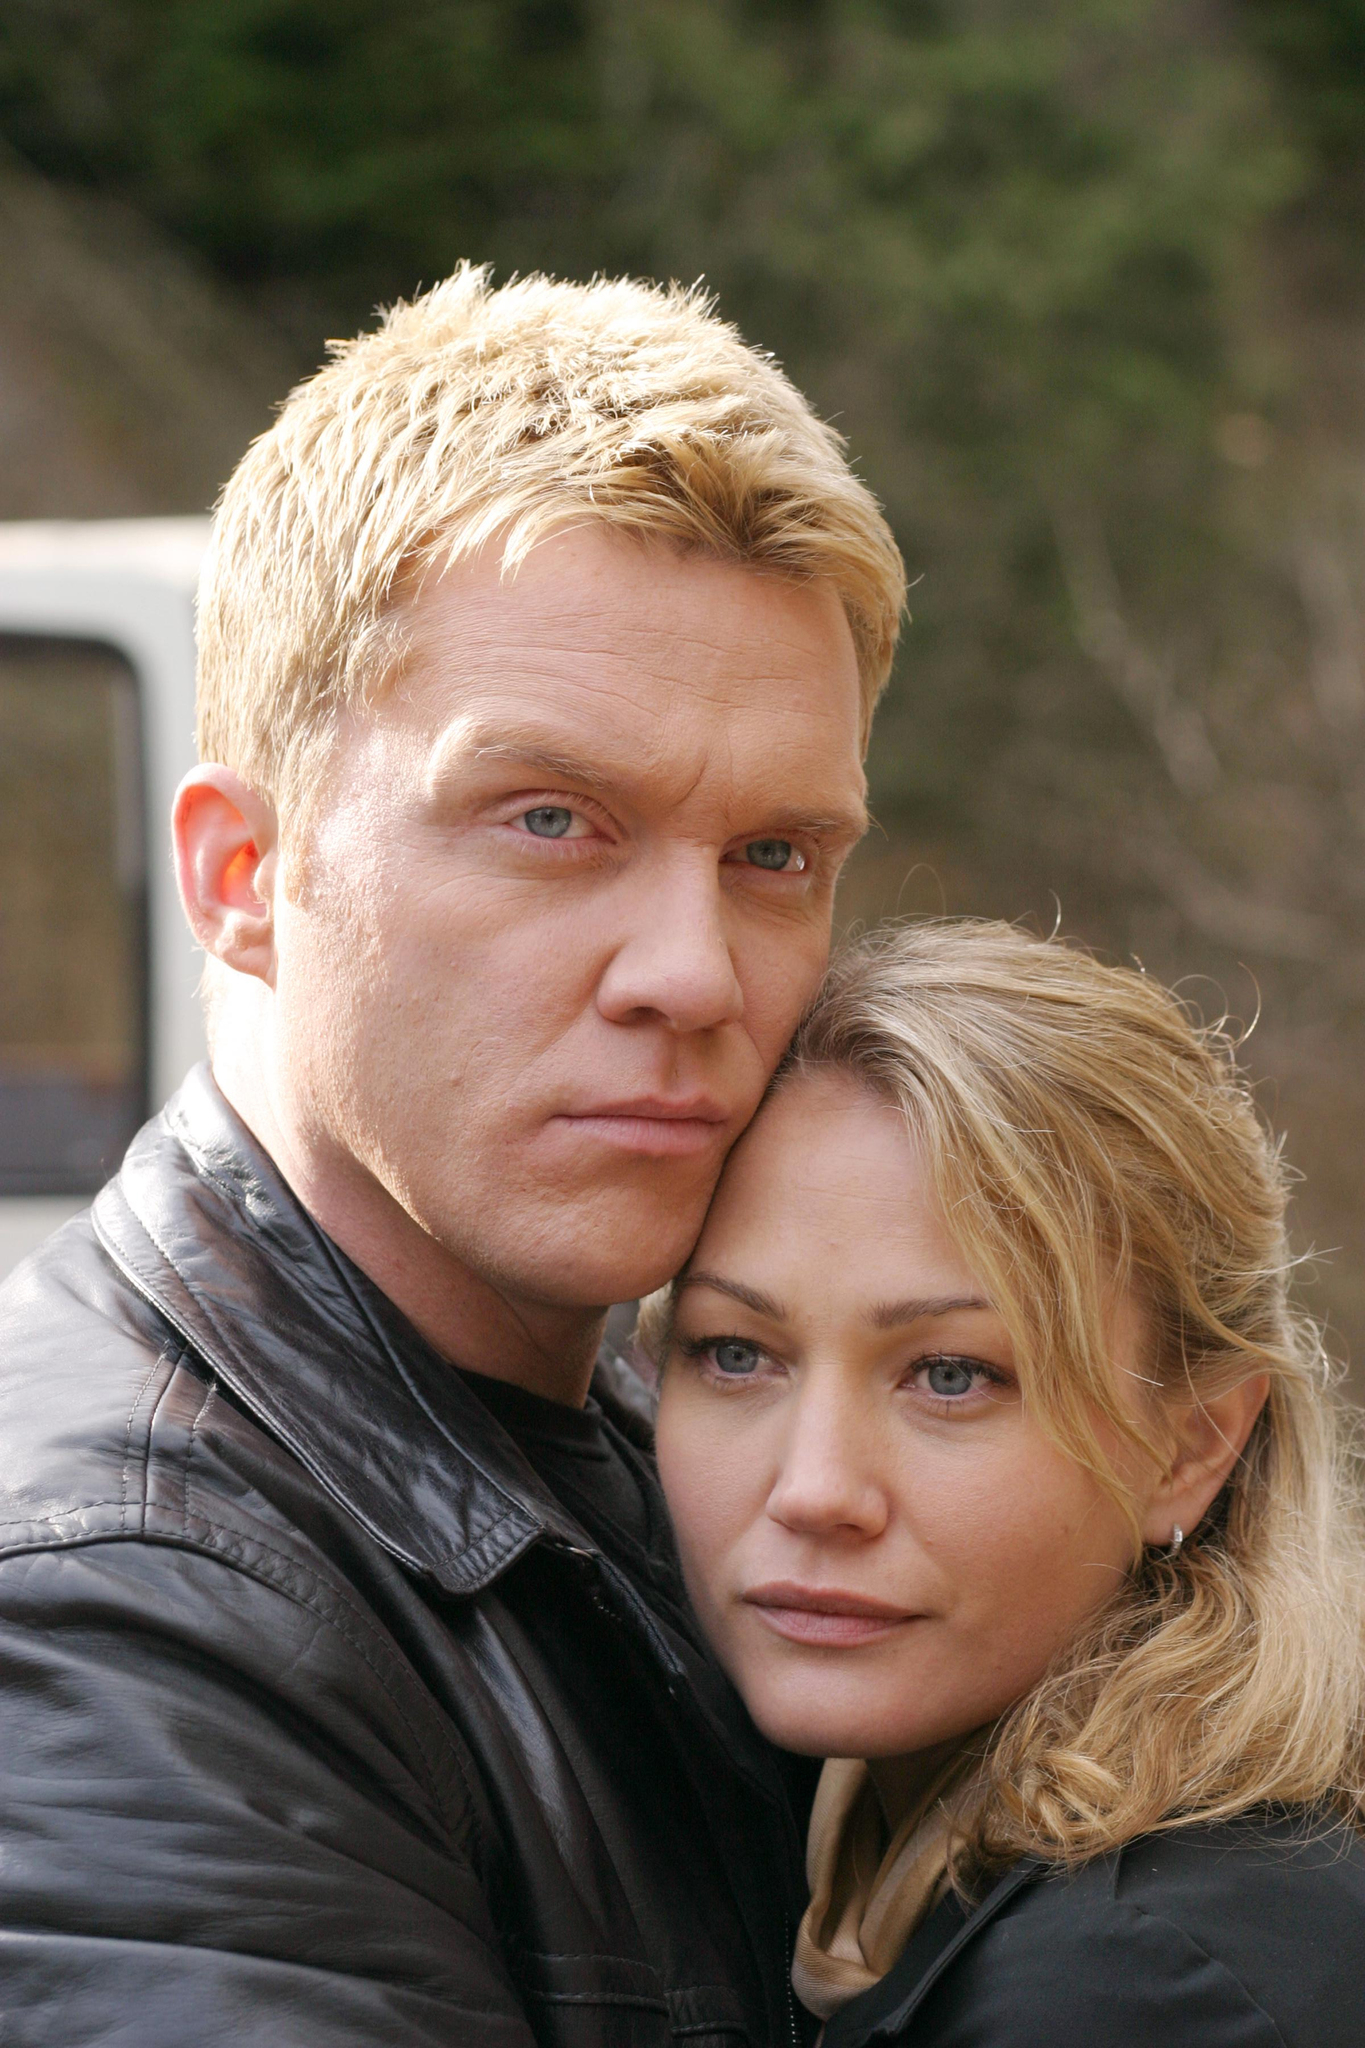 Still of Anthony Michael Hall and Sarah Wynter in The Dead Zone (2002)